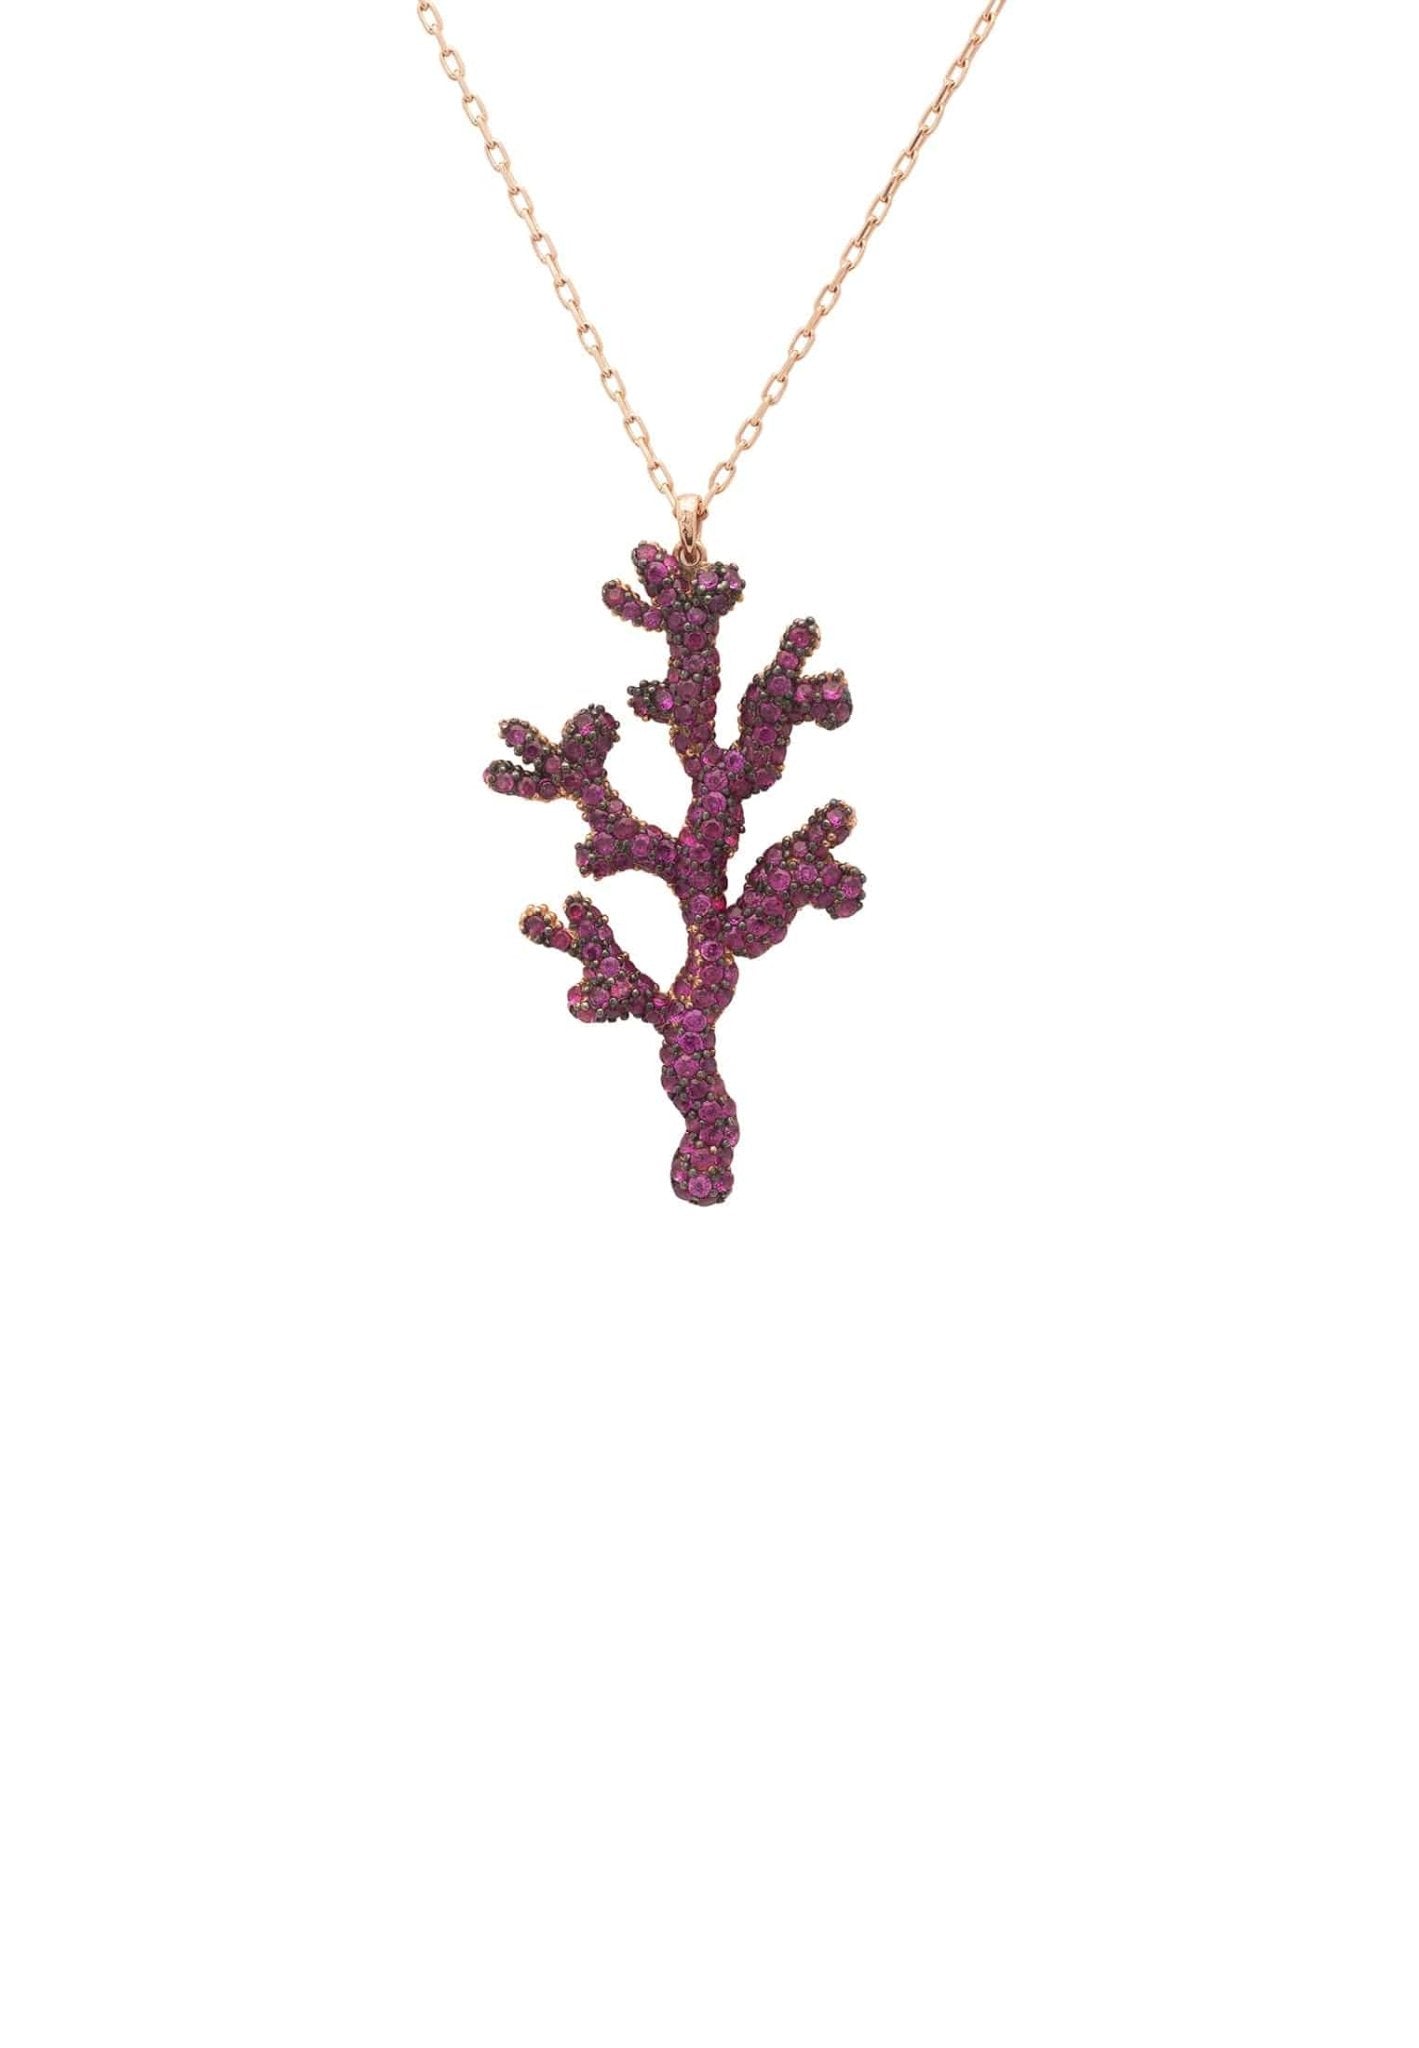 Coral Reef Necklace Hot Pink Cz - LATELITA Necklaces